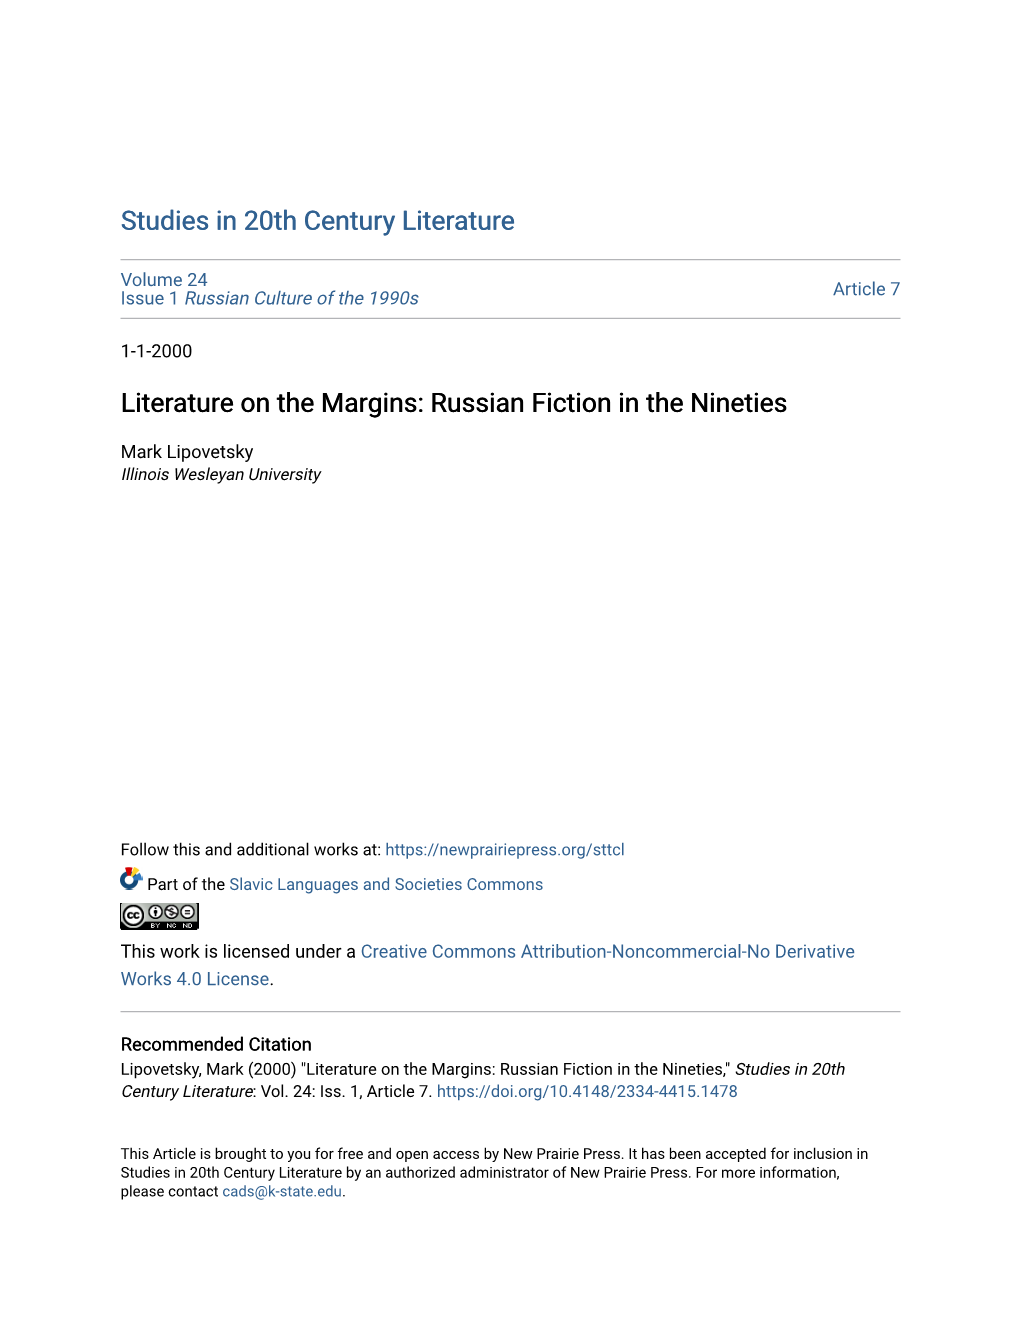 Literature on the Margins: Russian Fiction in the Nineties